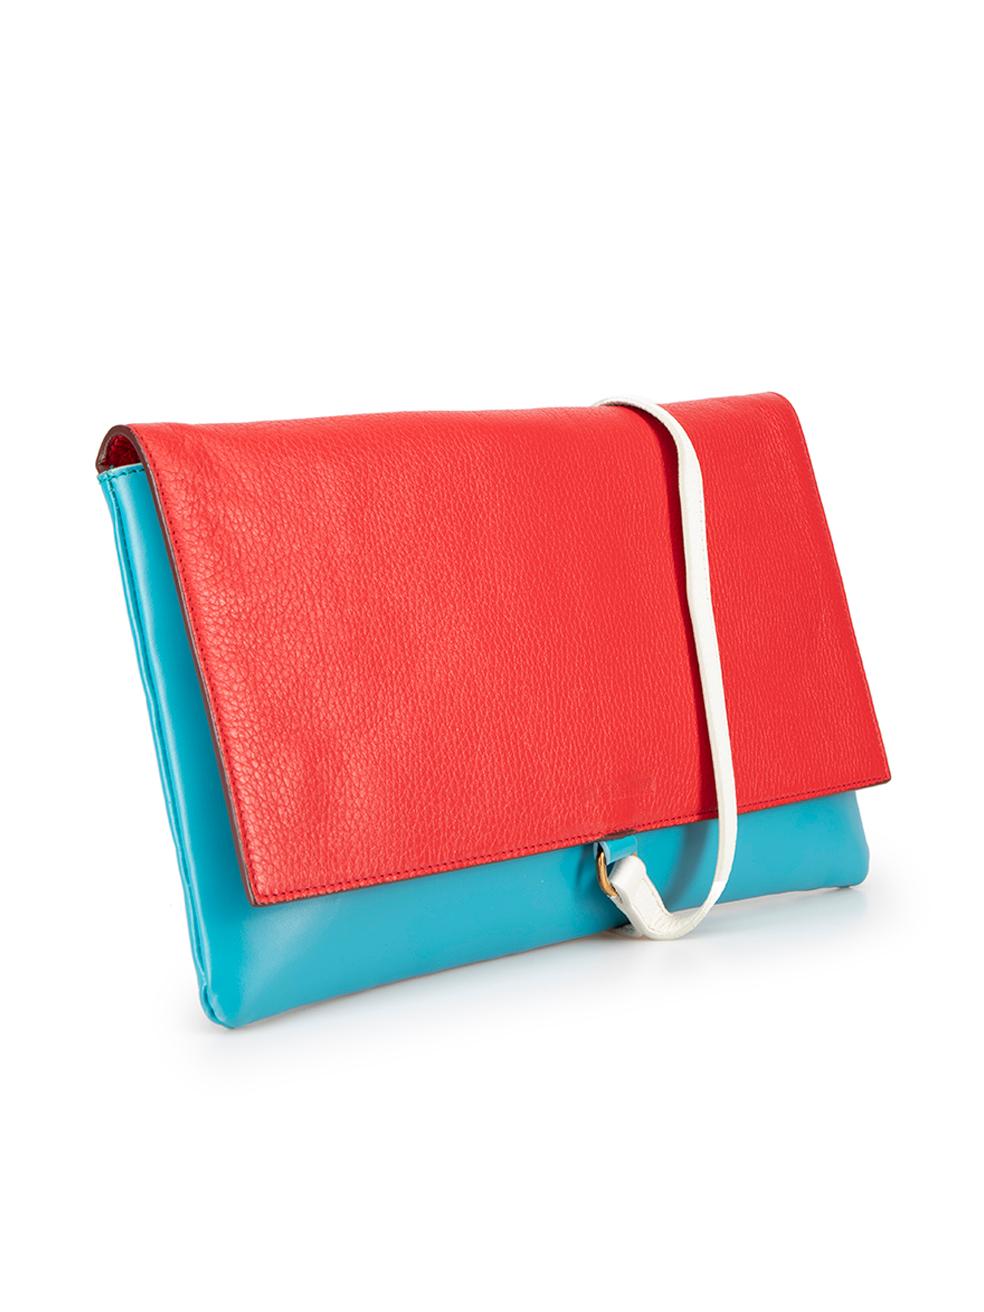 CONDITION is Very good. Minimal wear to bag is evident. Minimal wear to the inside face has small markings to the right on this used Jil Sander designer resale item.



Details


Blue, red, white colour block

Leather

Clutch bag

Flap closure

1x